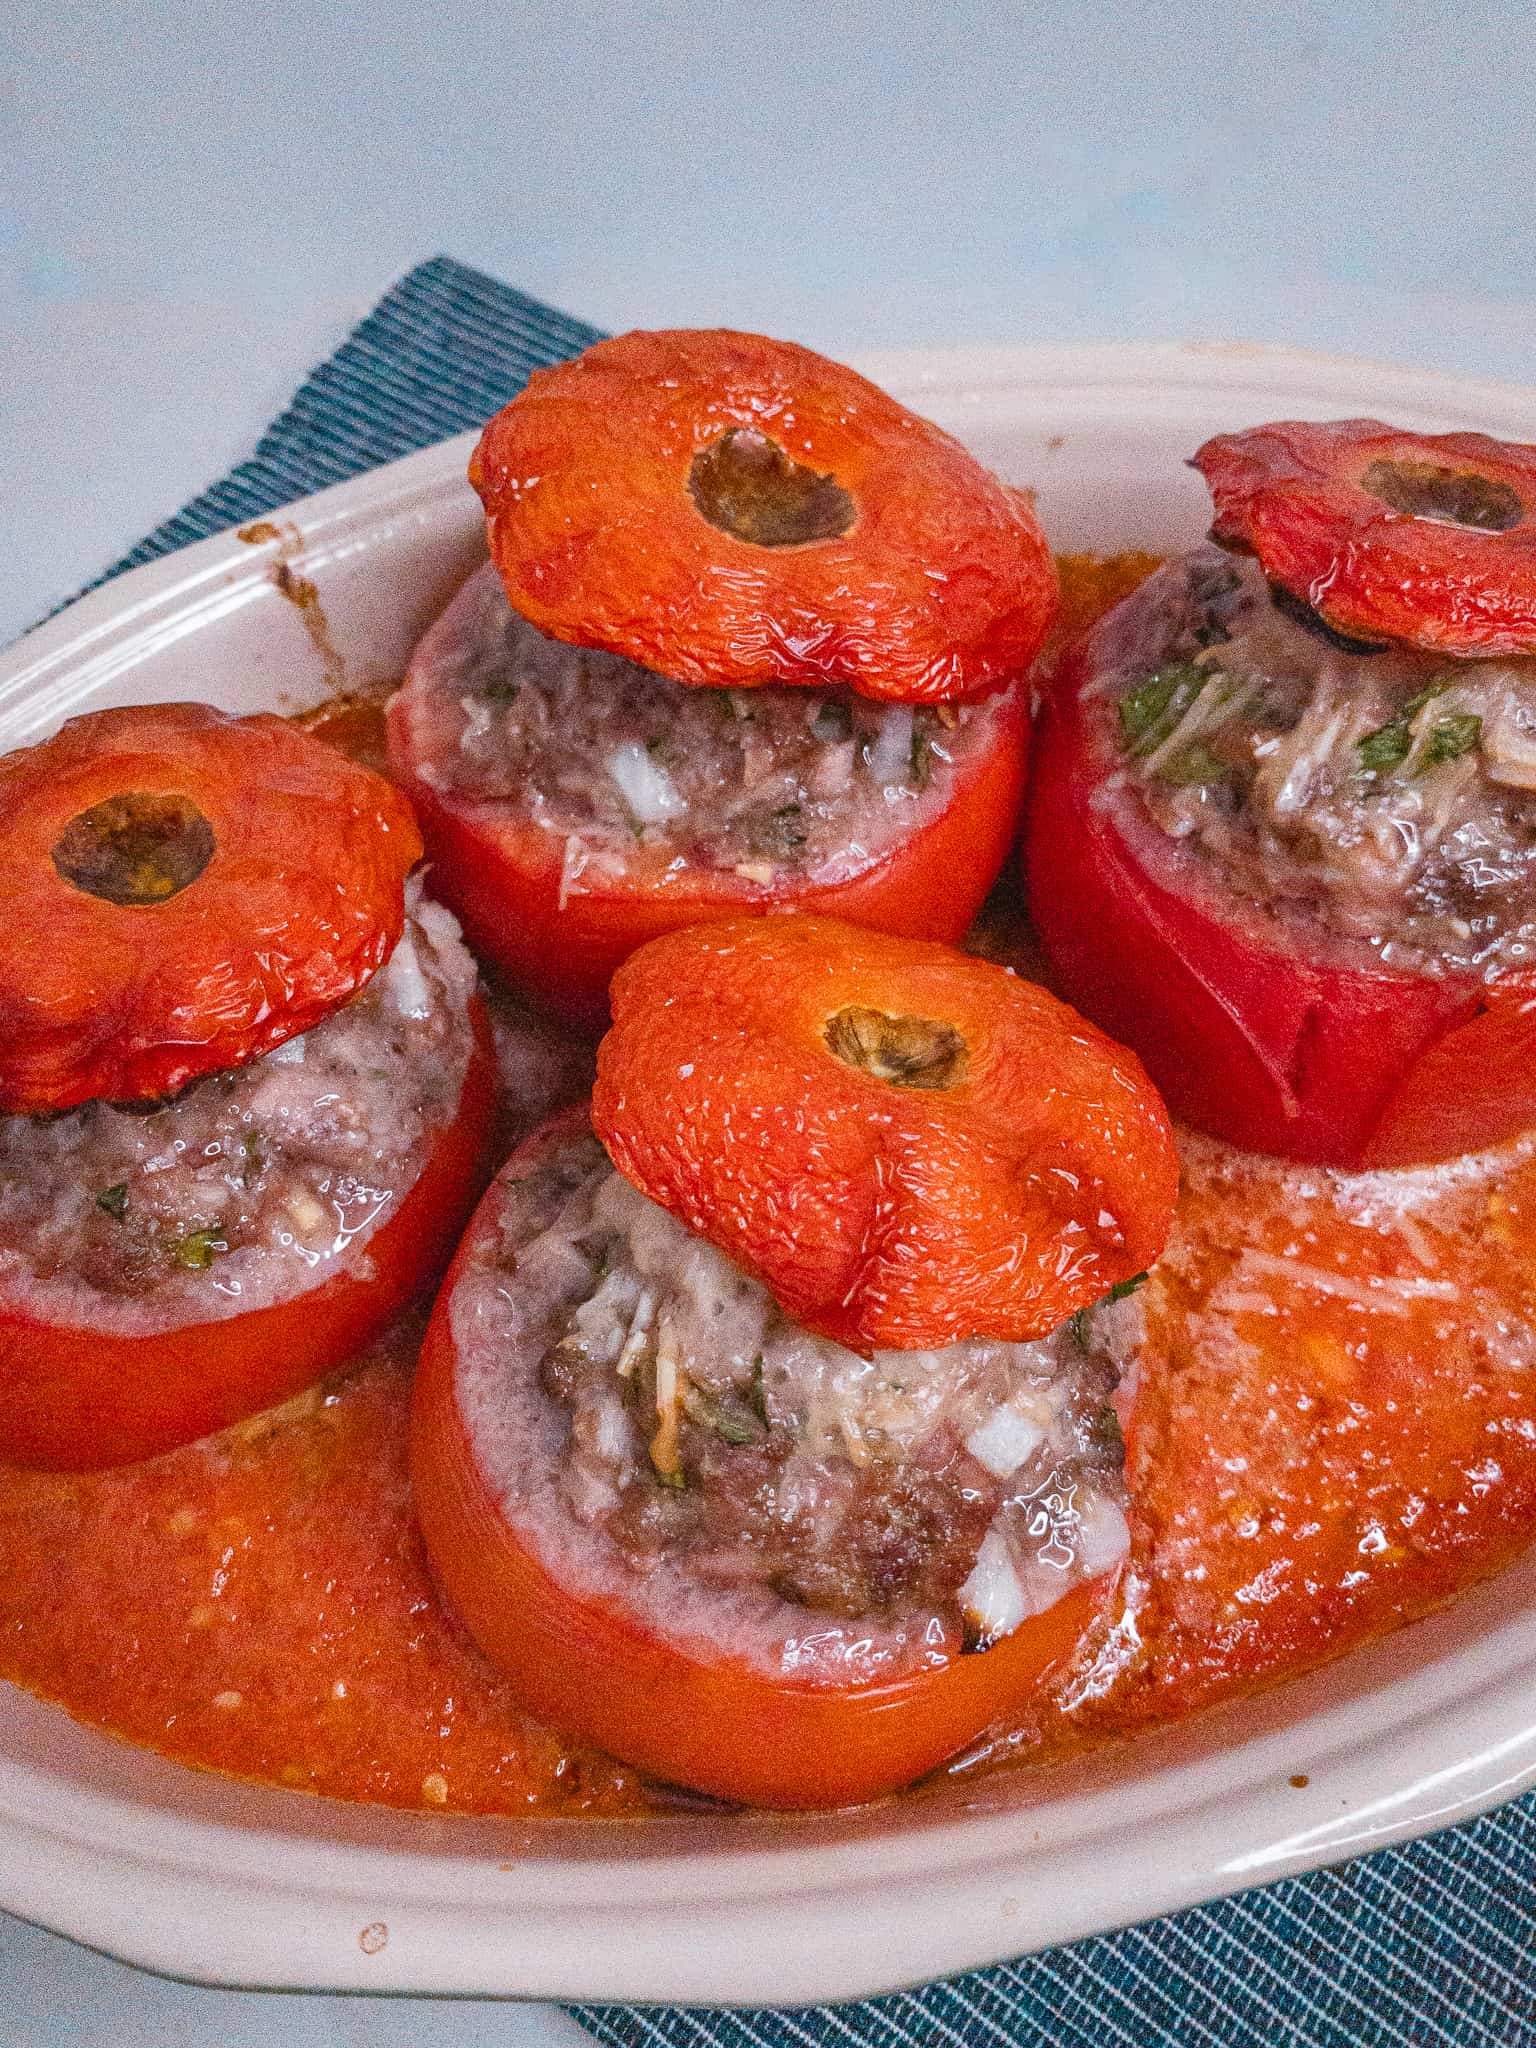 Dish of tomates farcis ready to serve